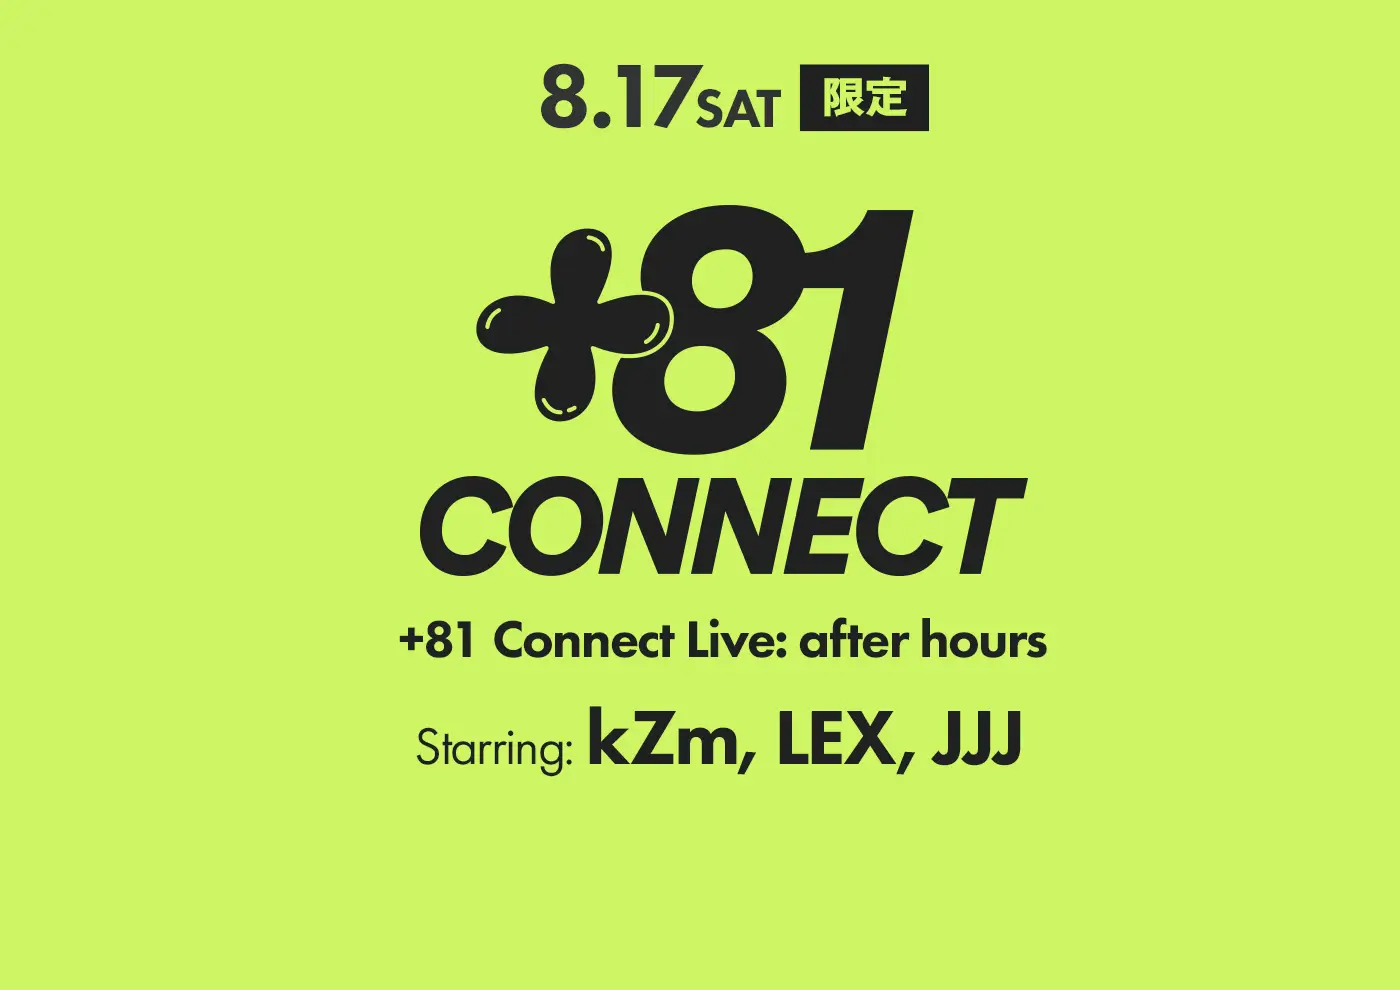 [+81 Connect Live: after hours]